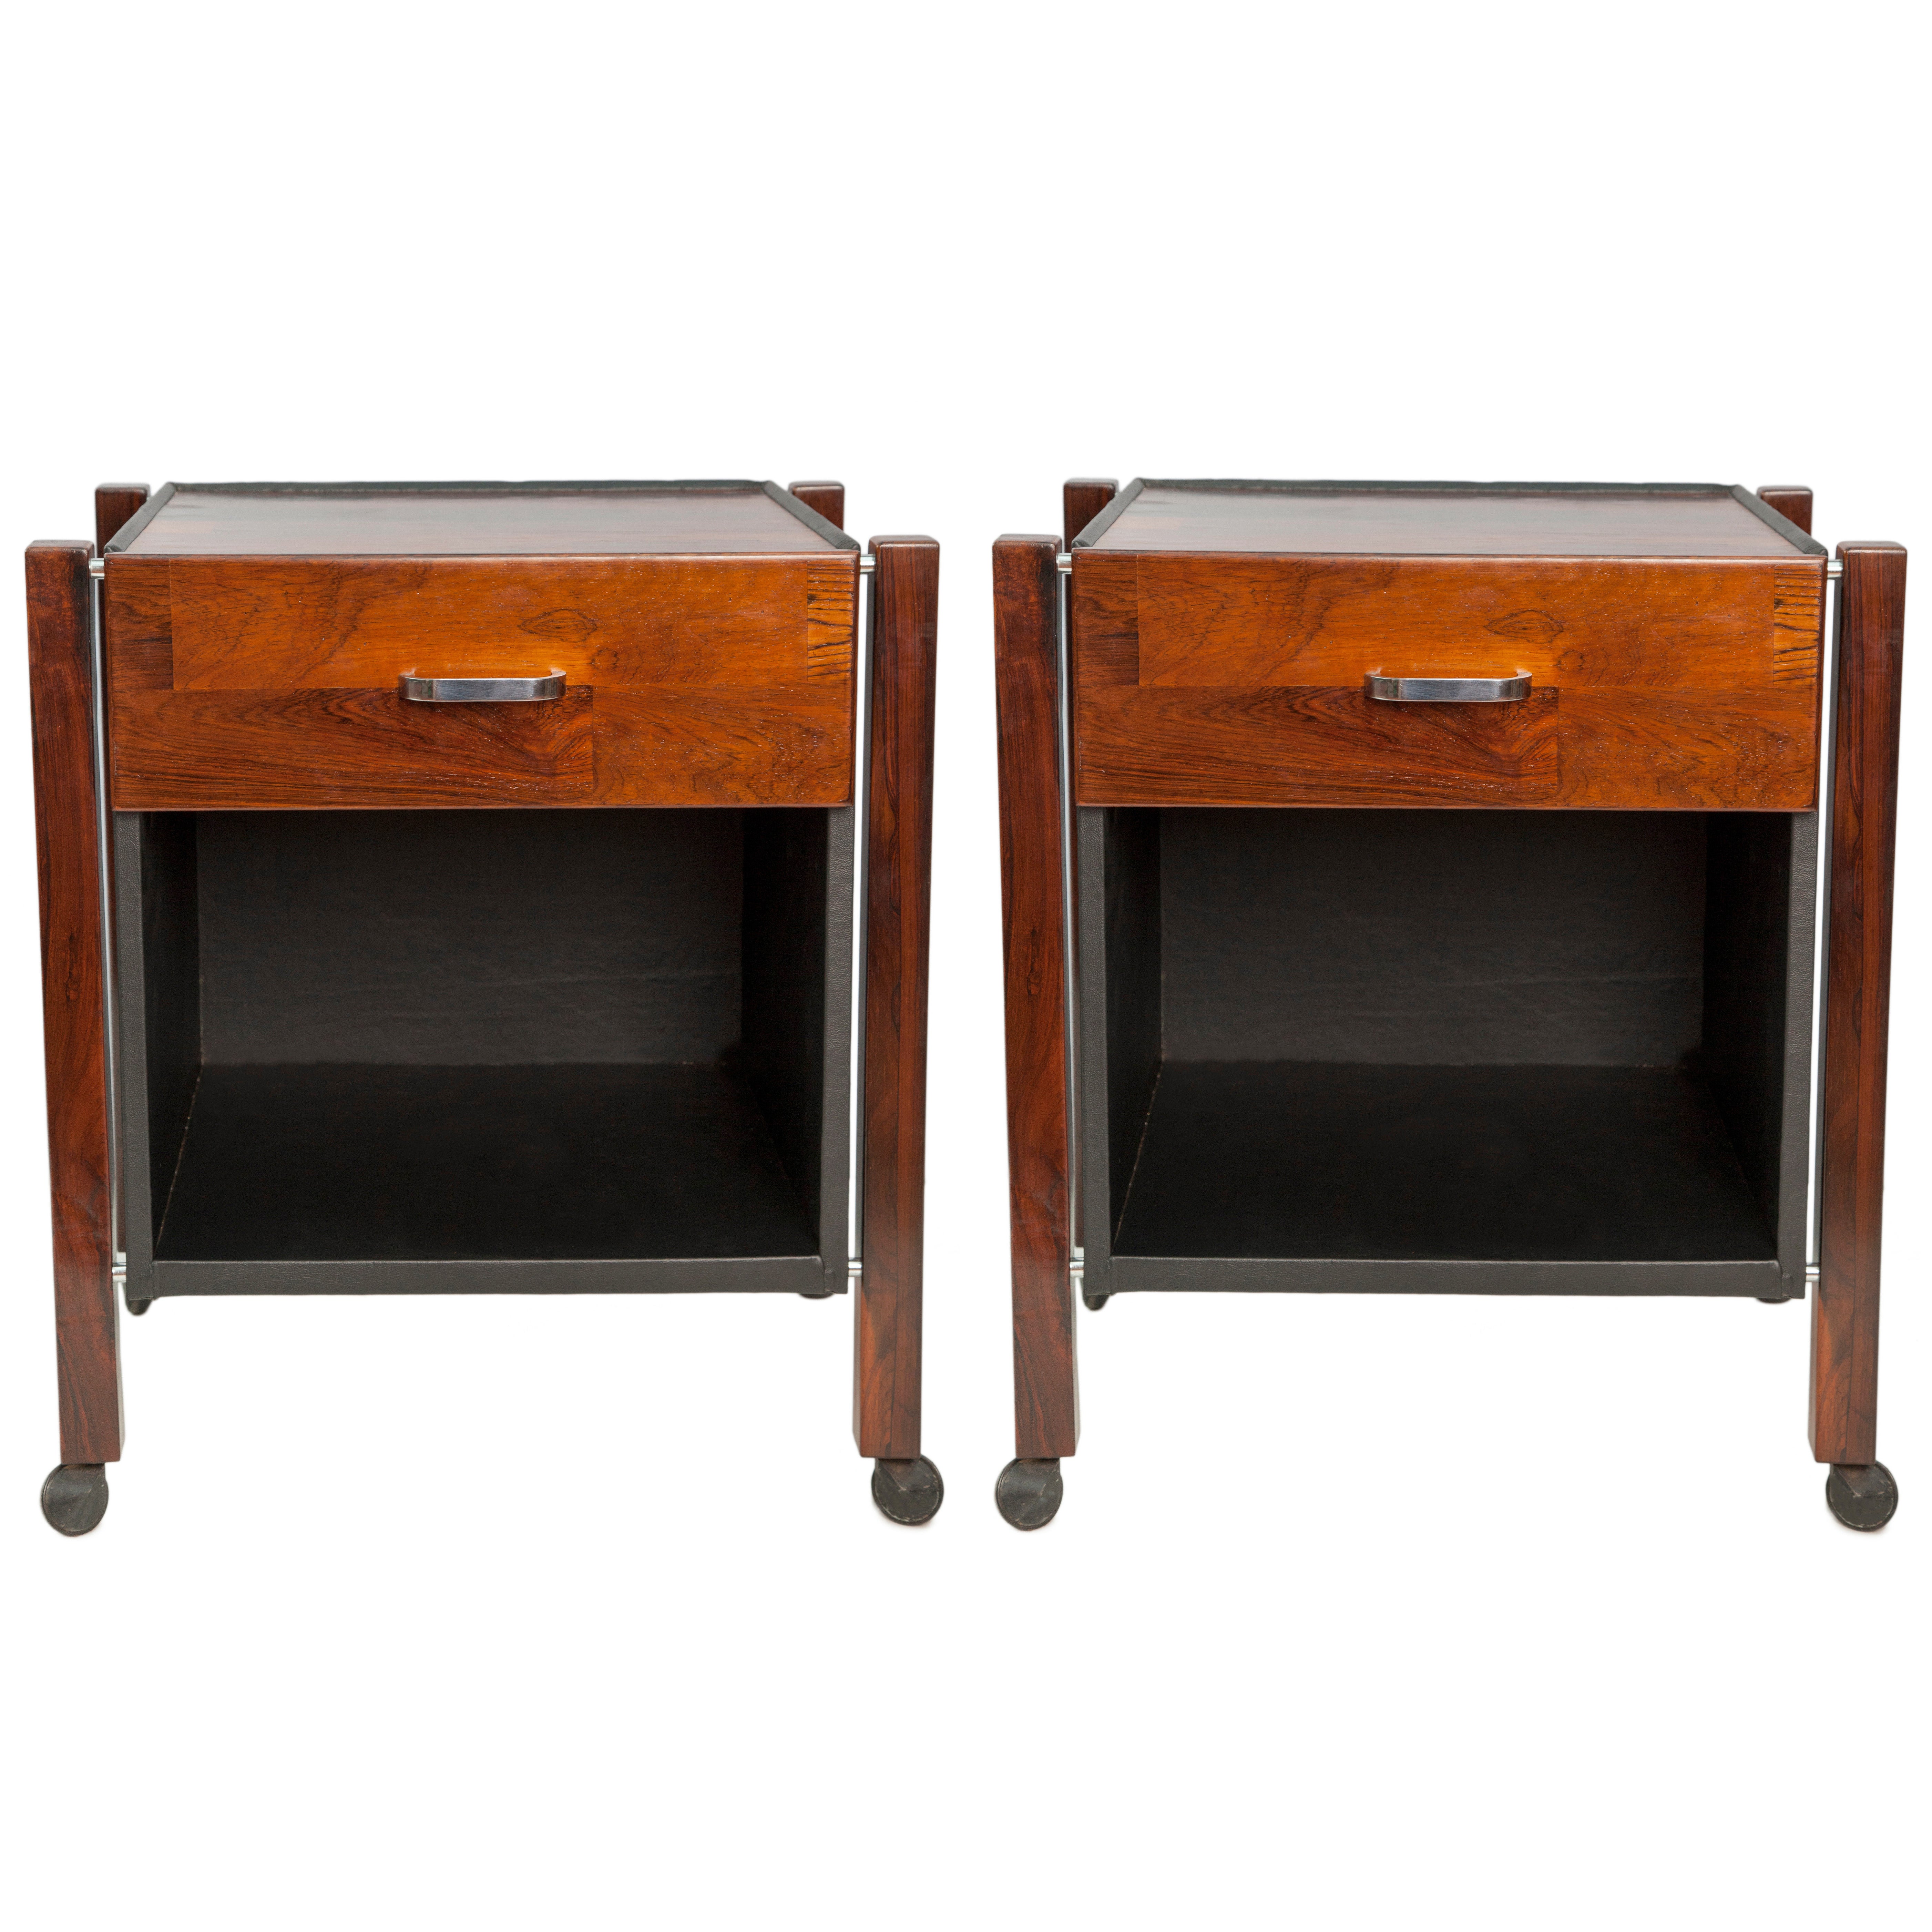 Pair of Jorge Zalszupin Side Tables in Jacaranda and Black Leather for L'Atelier